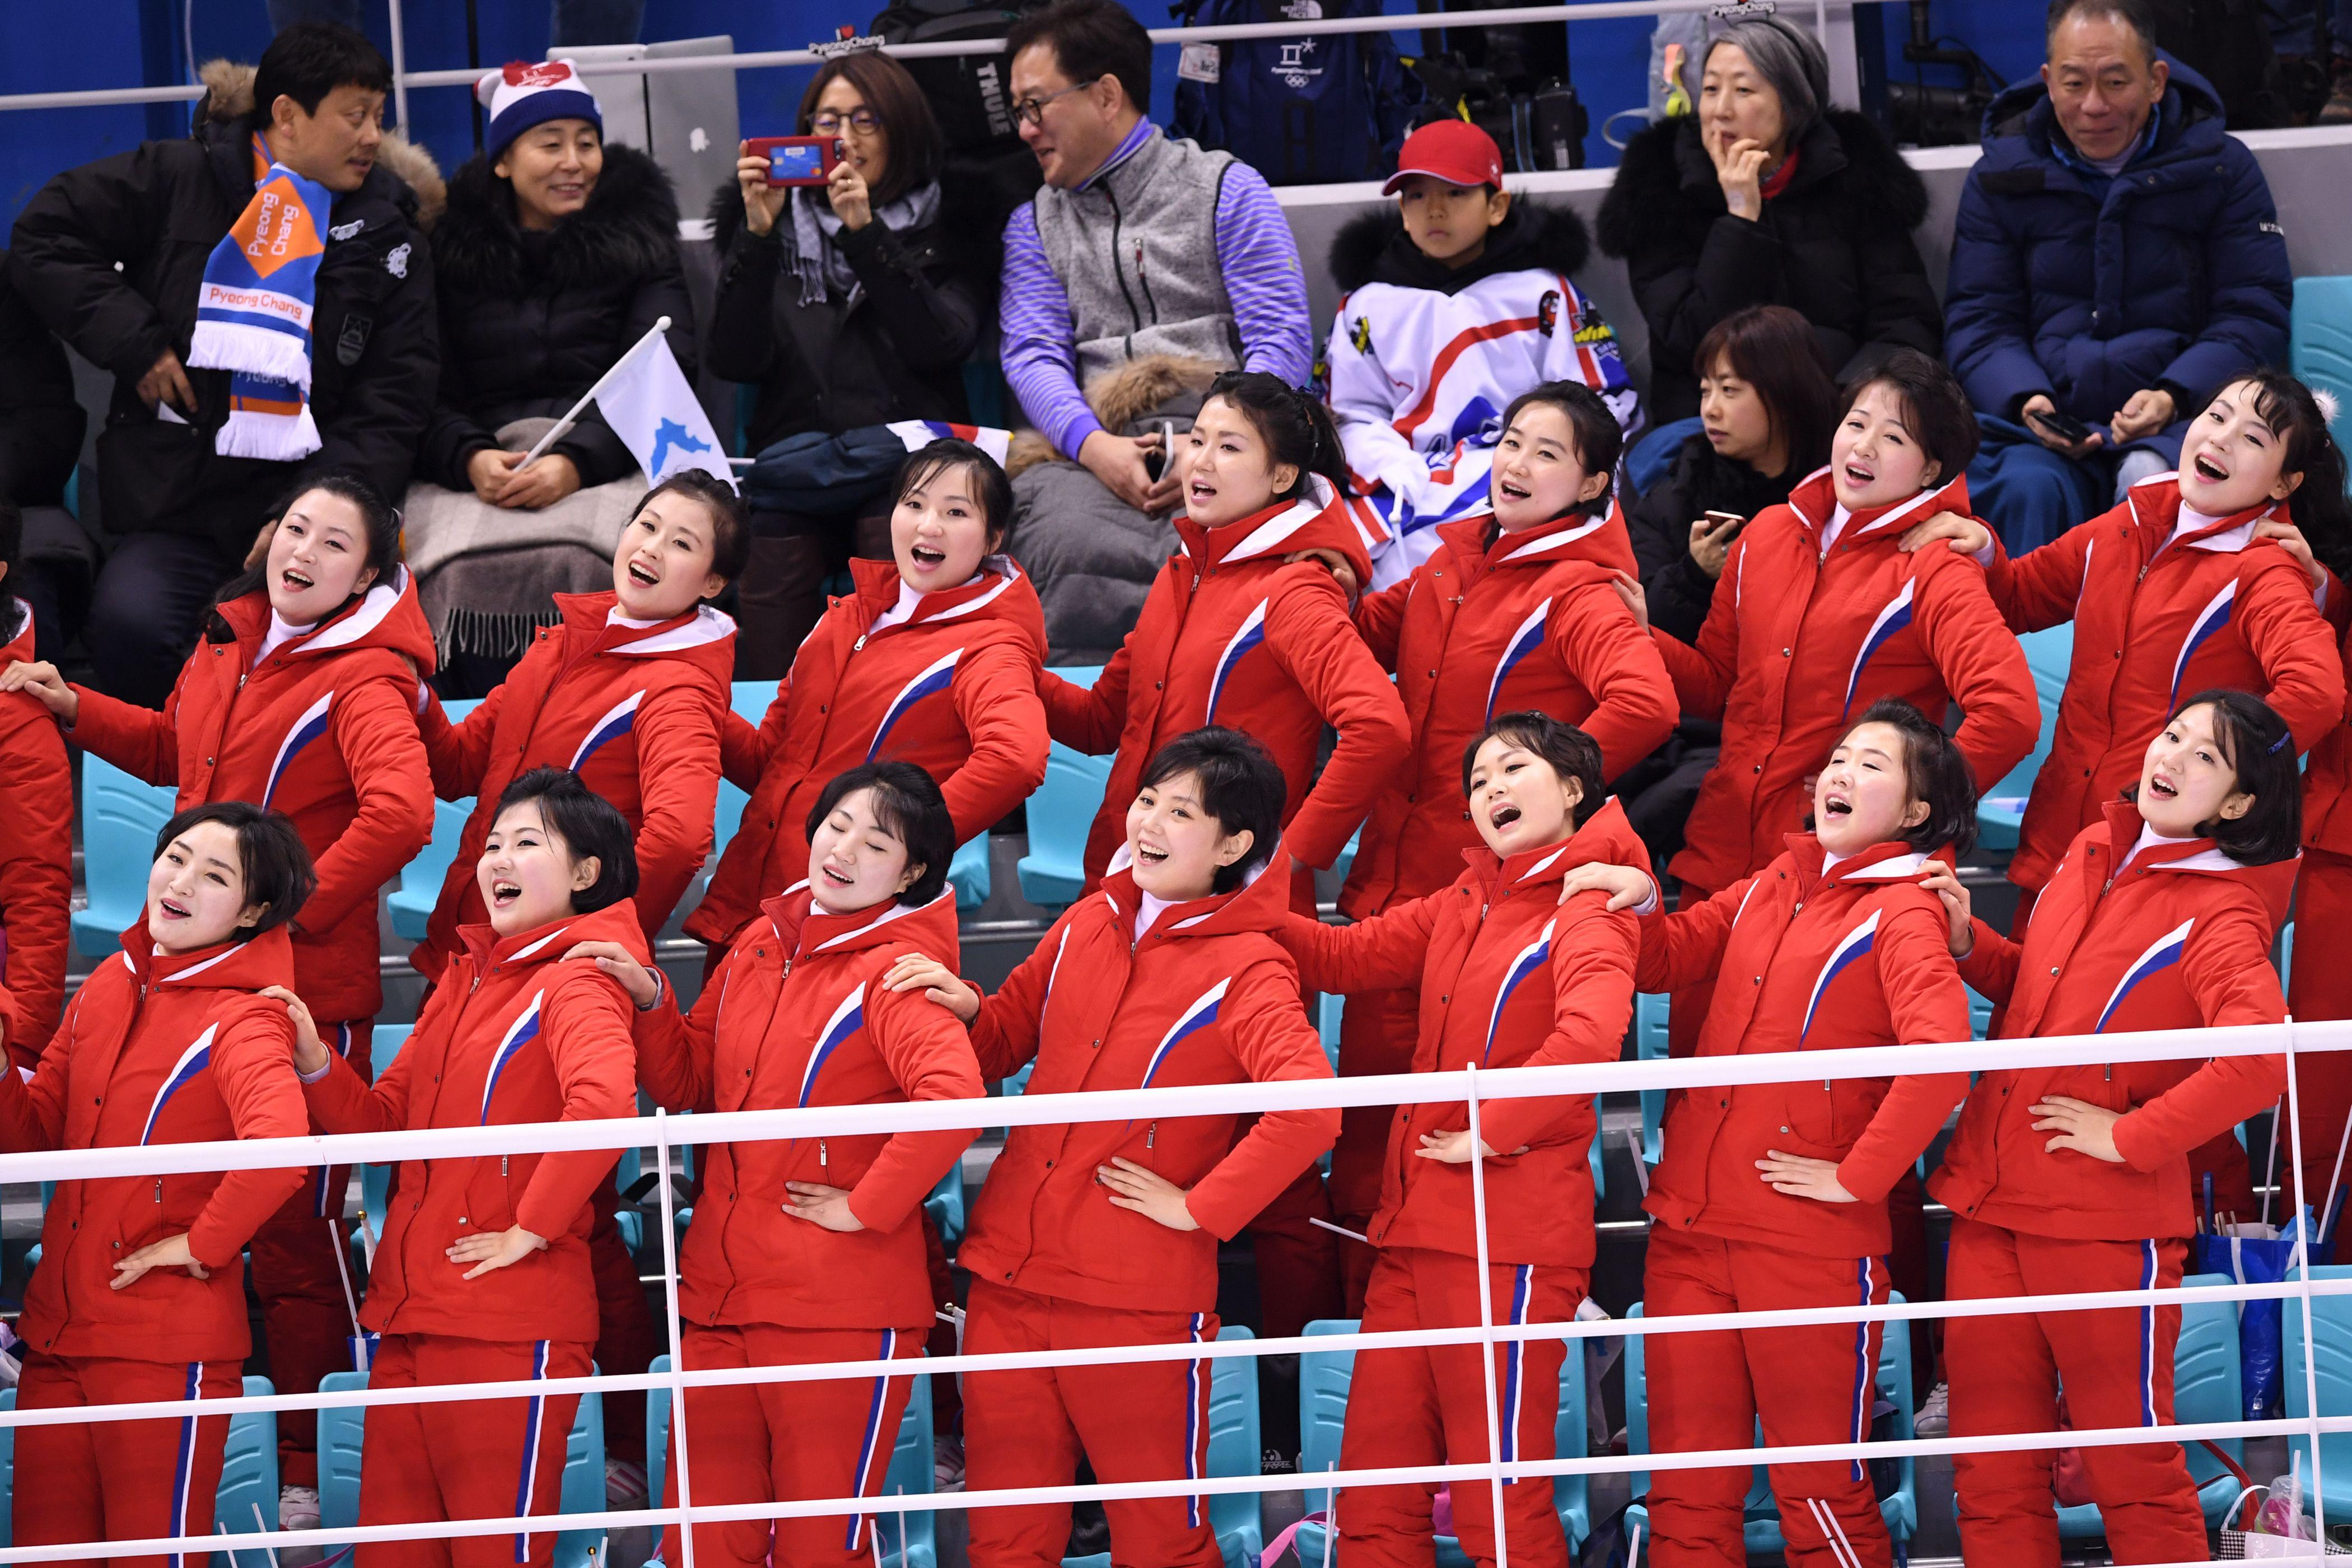 North Korea's cheerleaders cheer during the women's preliminary round ice hockey match between Switzerland and the Unified Korean team during the Pyeongchang 2018 Winter Olympic Games at the Kwandong Hockey Centre in Gangneung on February 10, 2018.   / AFP PHOTO / JUNG Yeon-Je        (Photo credit should read JUNG YEON-JE/AFP/Getty Images)